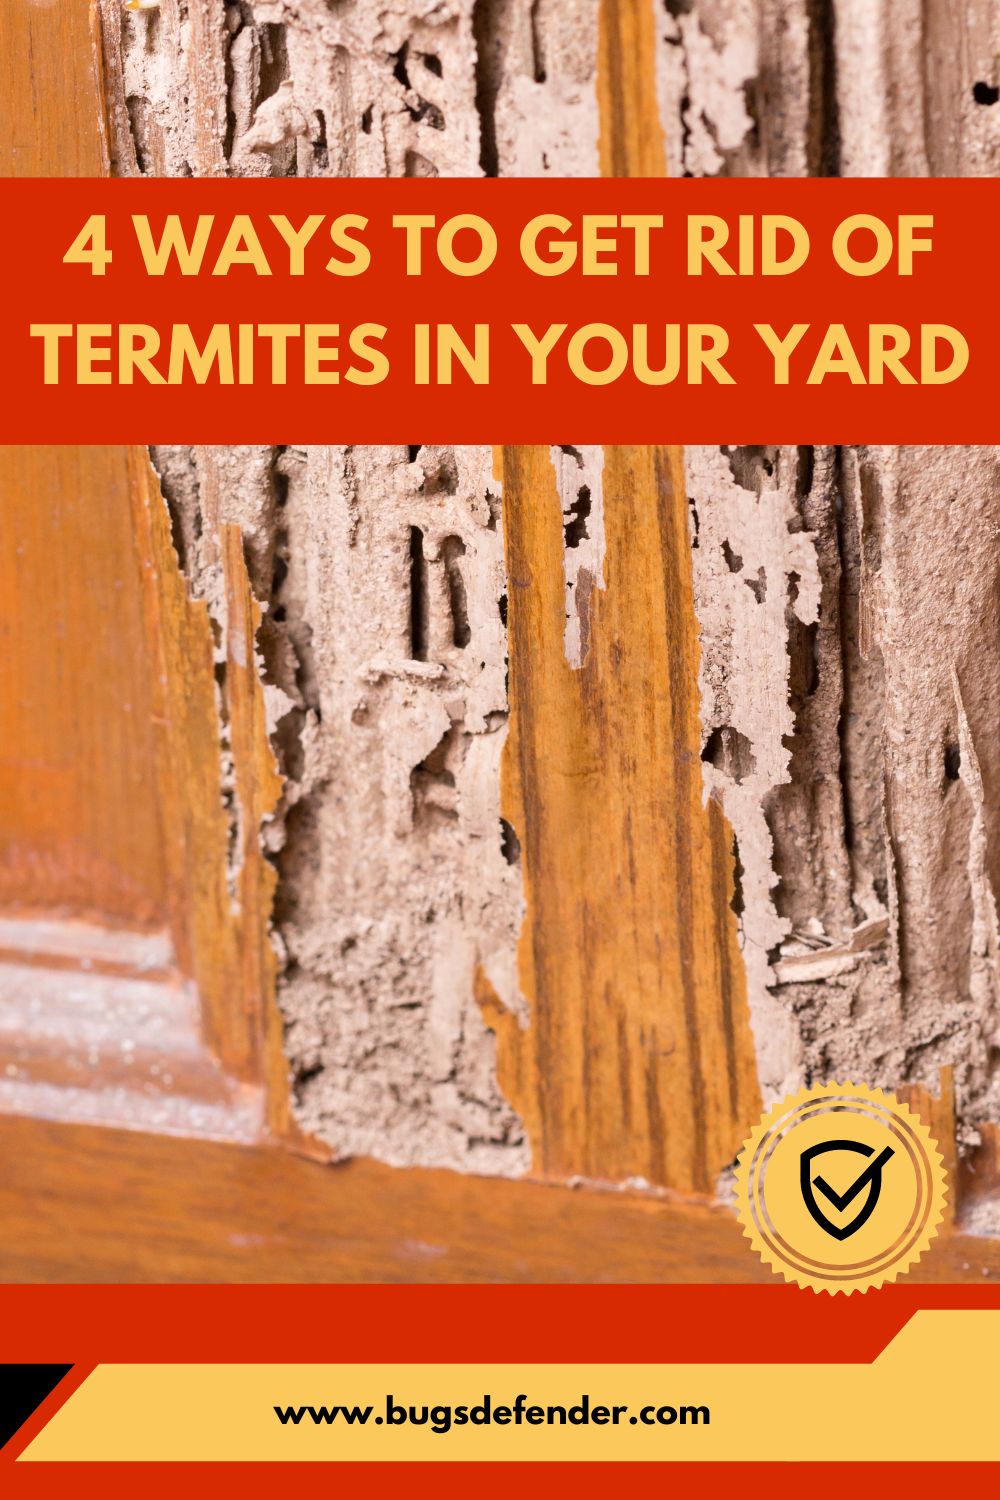 4 Ways to Get Rid of Termites in Your Yard pin2